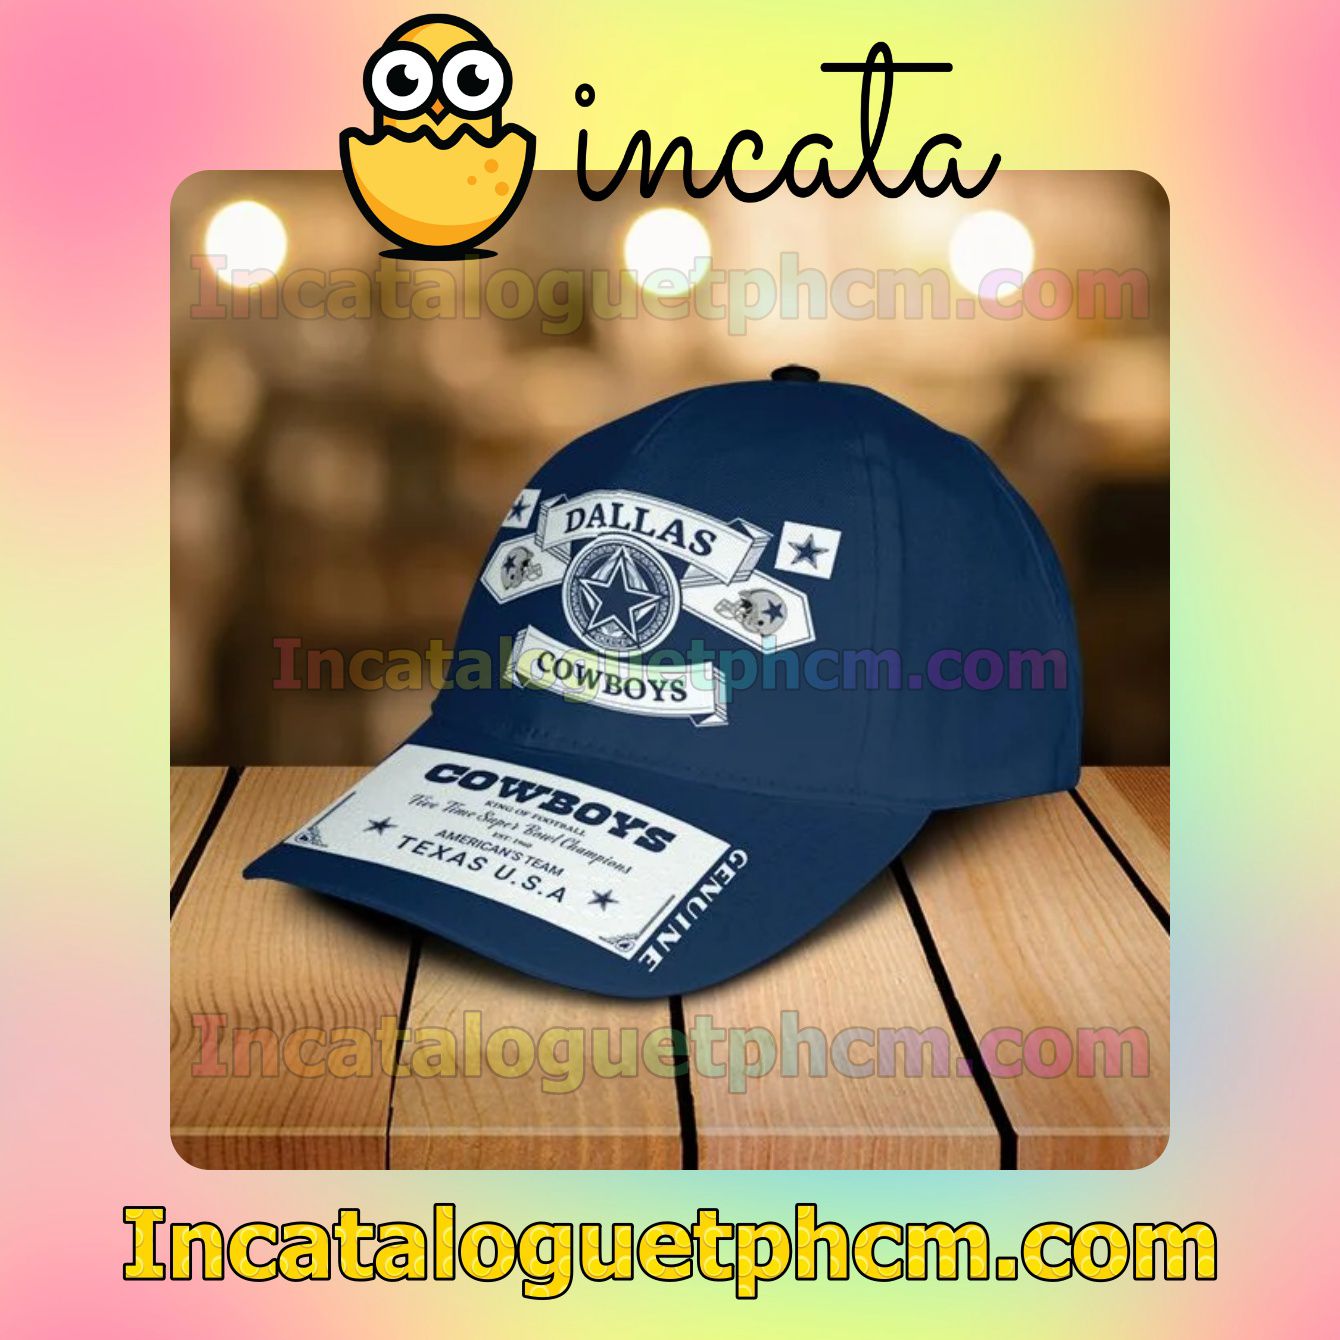 Print On Demand Dallas Cowboys Genuine Navy Classic Hat Caps Gift For Men